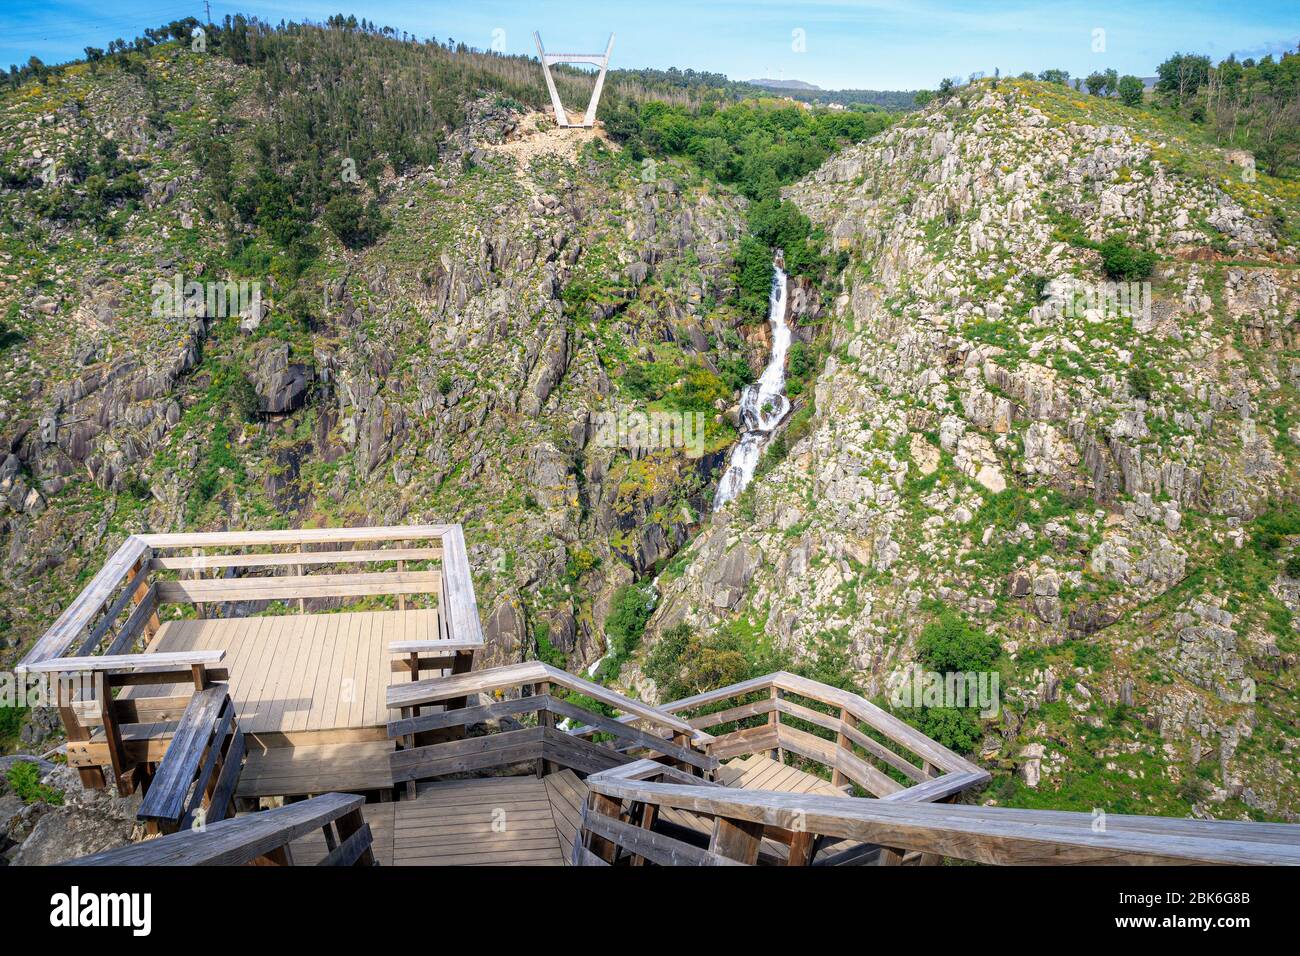 Arouca, Portugal - April 28, 2019: View of the Paiva Walkways with a viewpoint in the foreground and in the background the rocky massif of the opposit Stock Photo